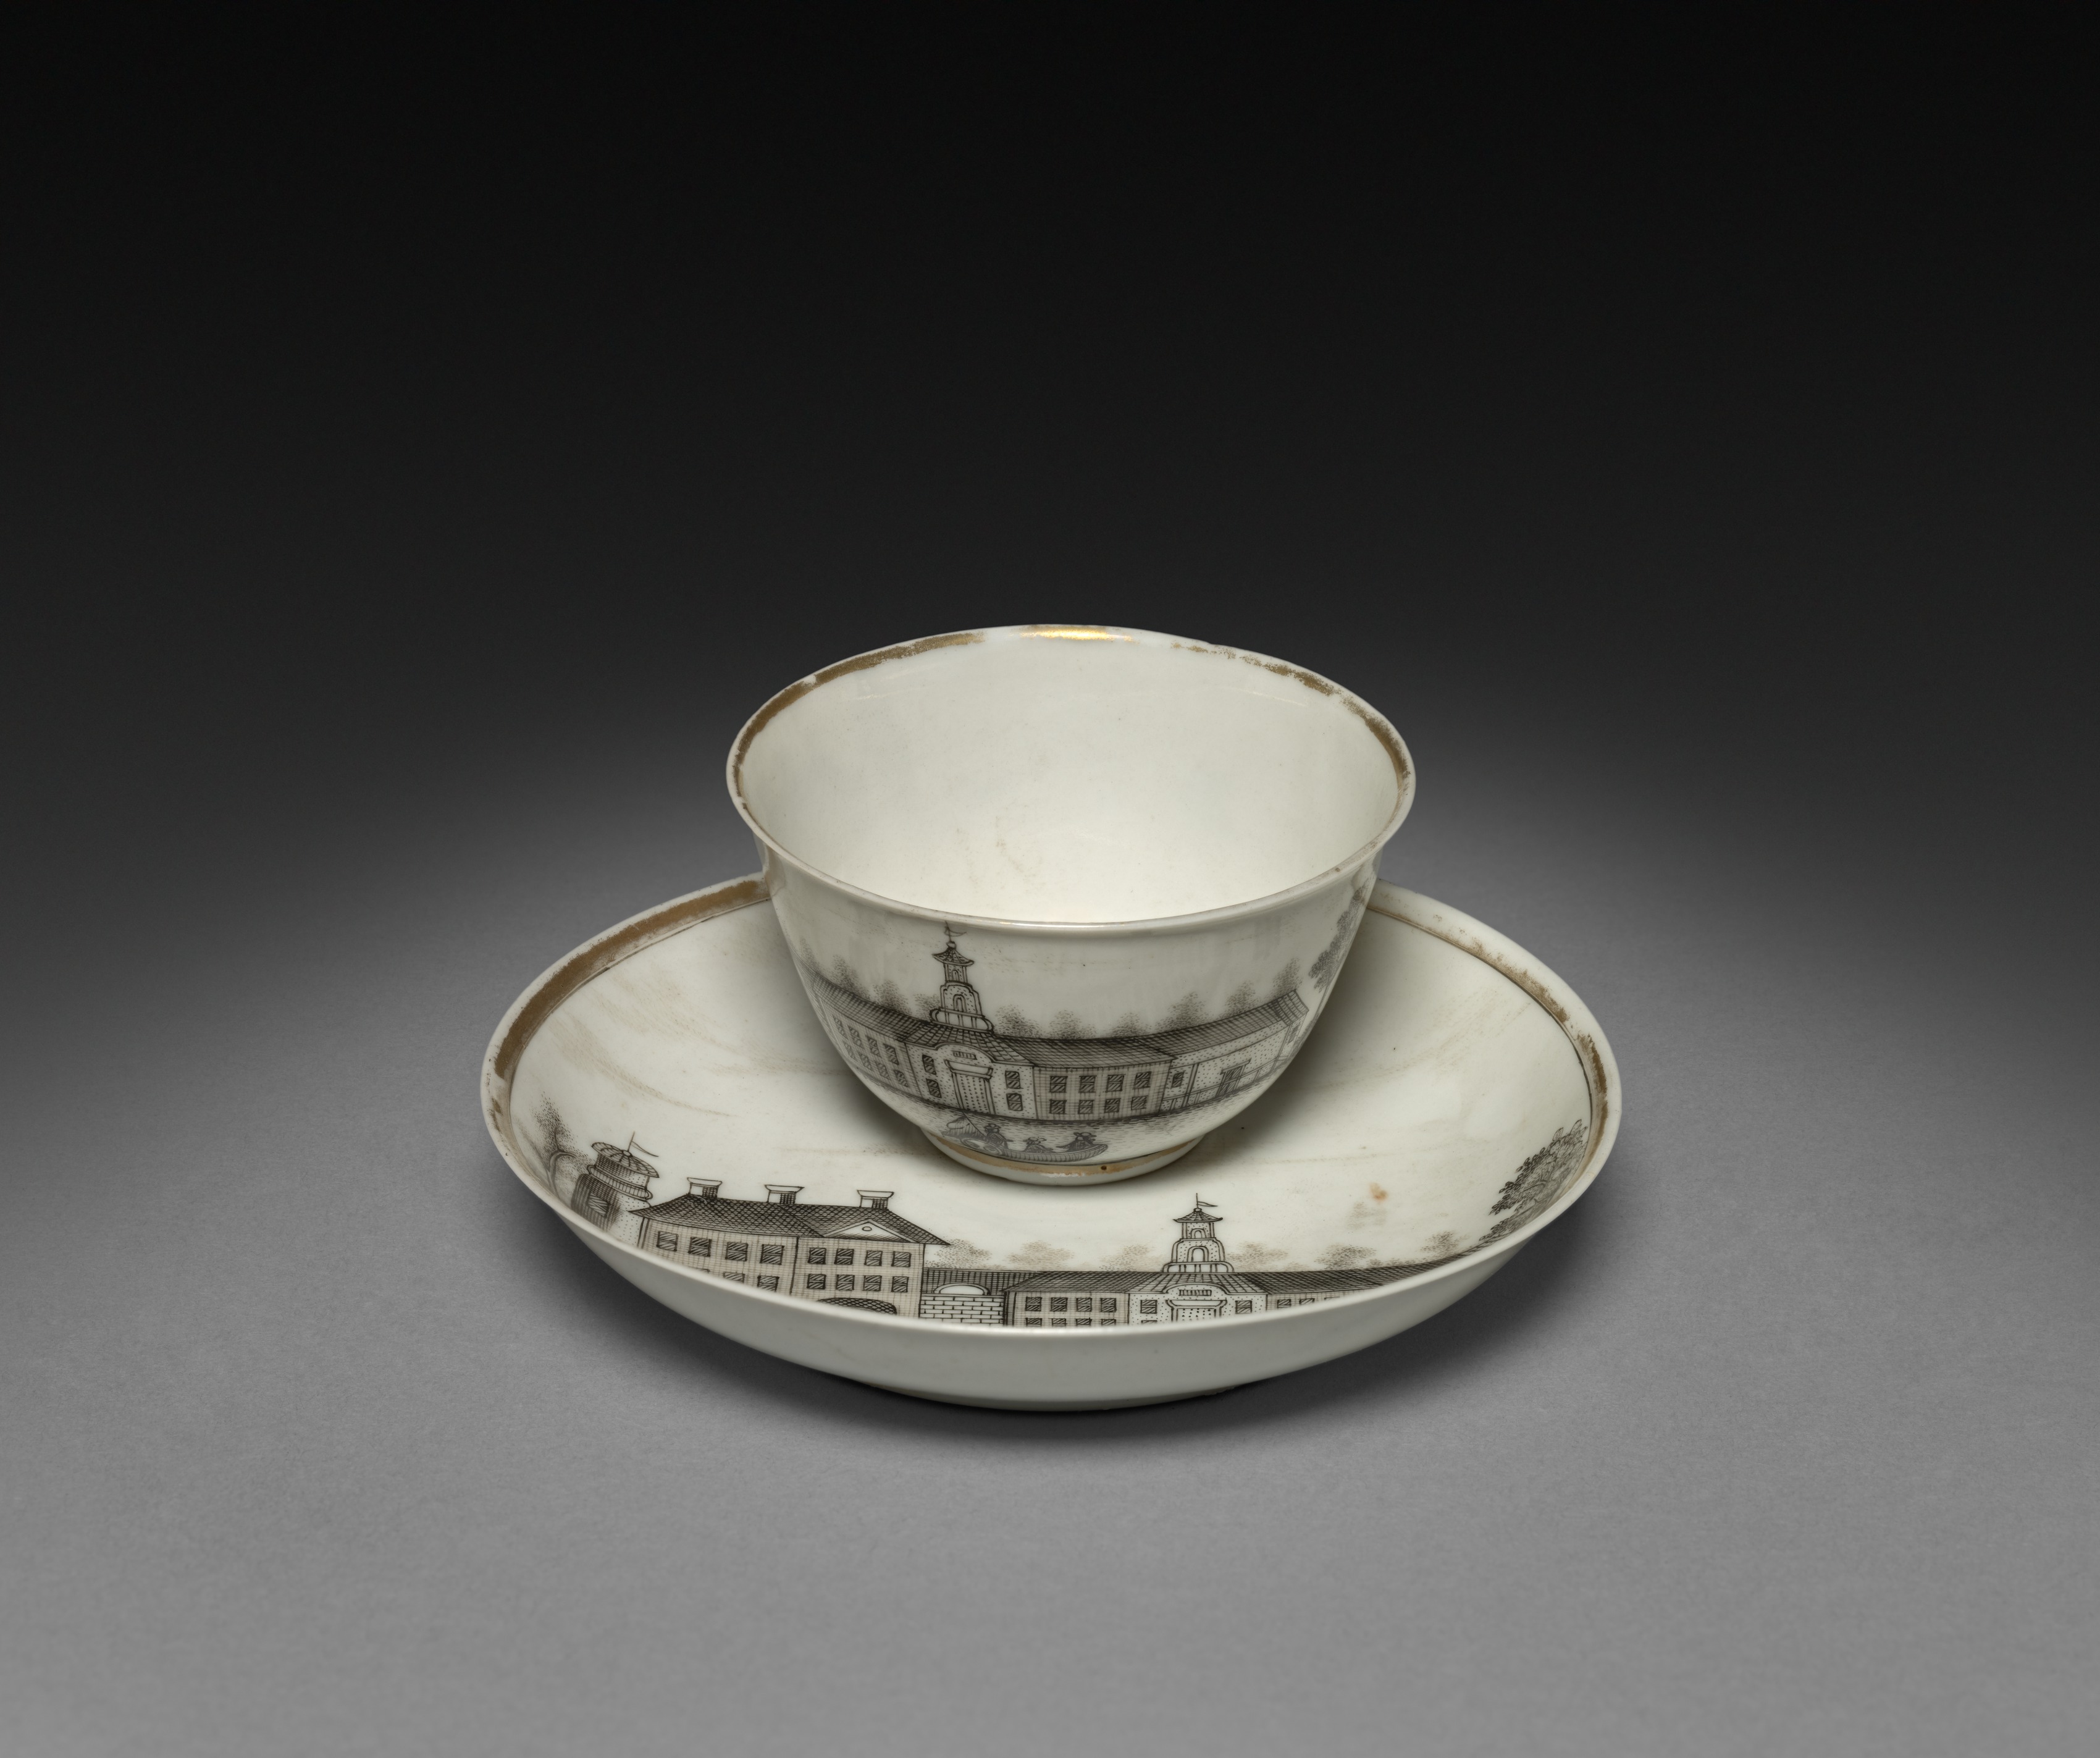 Tea Bowl and Saucer with View of Town (Cleves?)